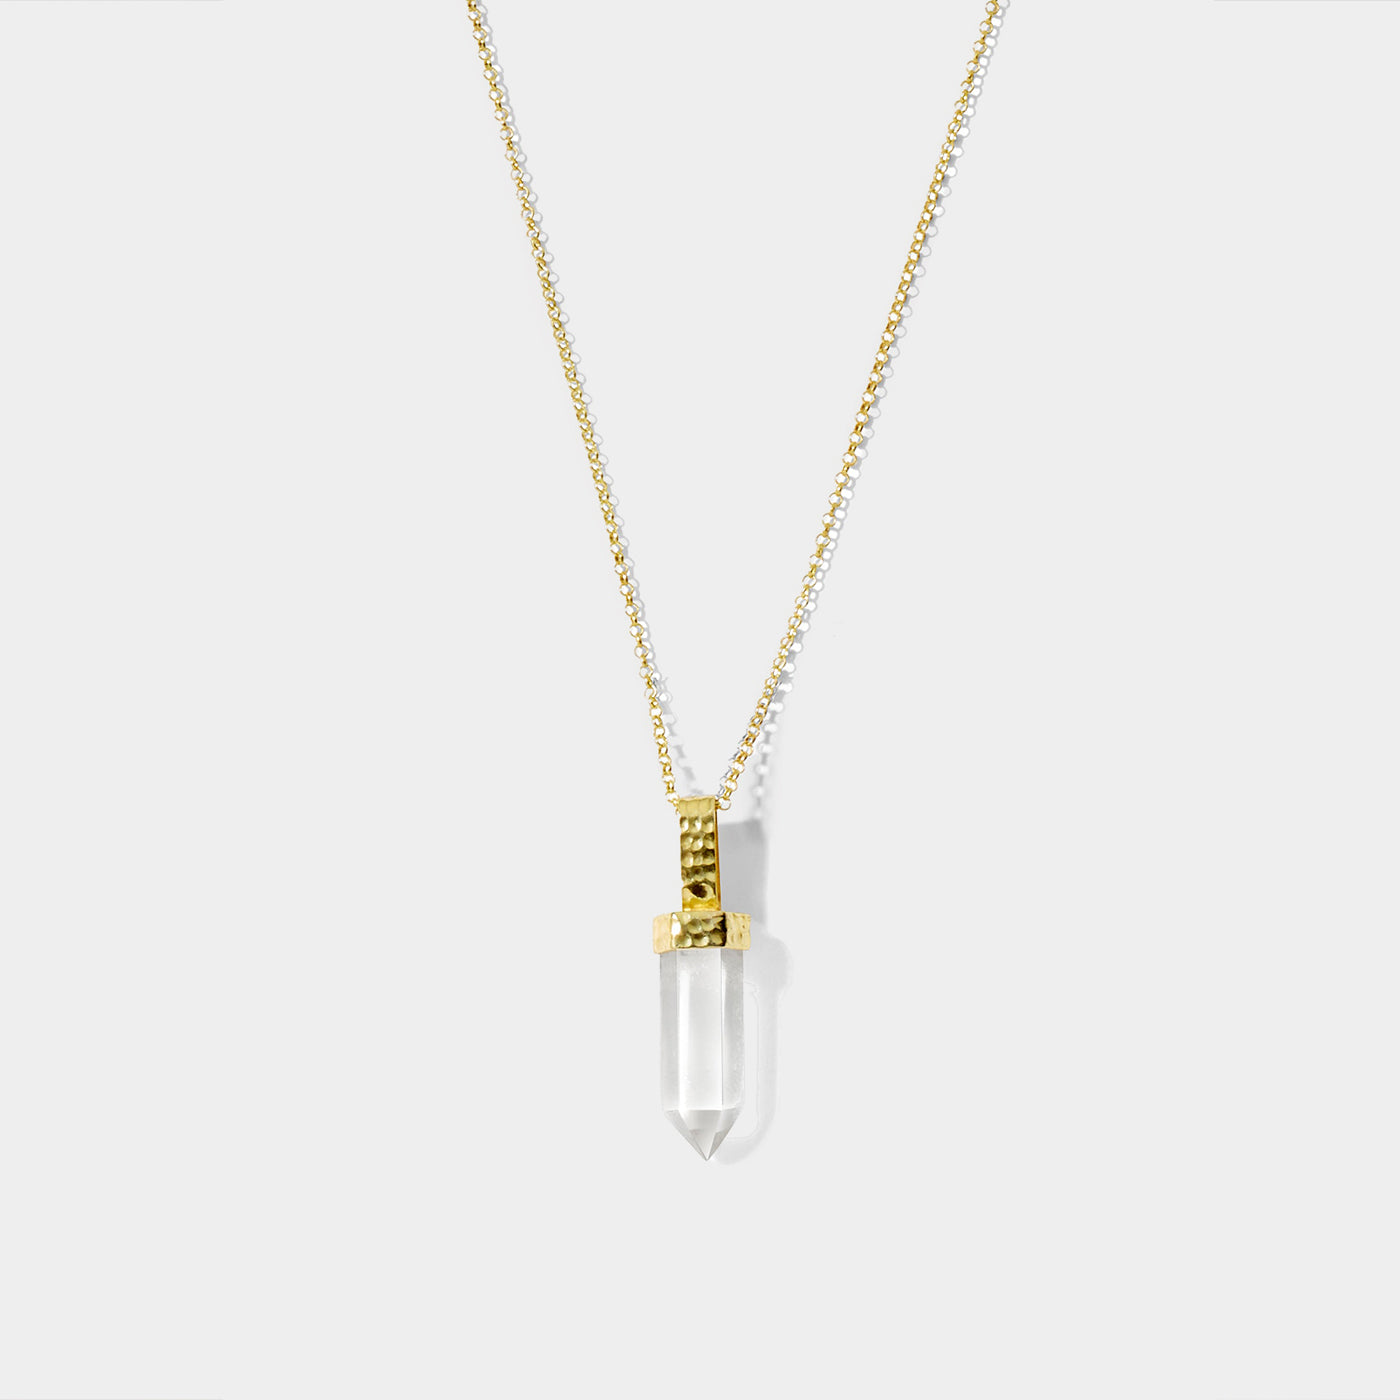 Krystle Knight - Halcyon Necklace - Clear Quartz - 12K Gold Plated